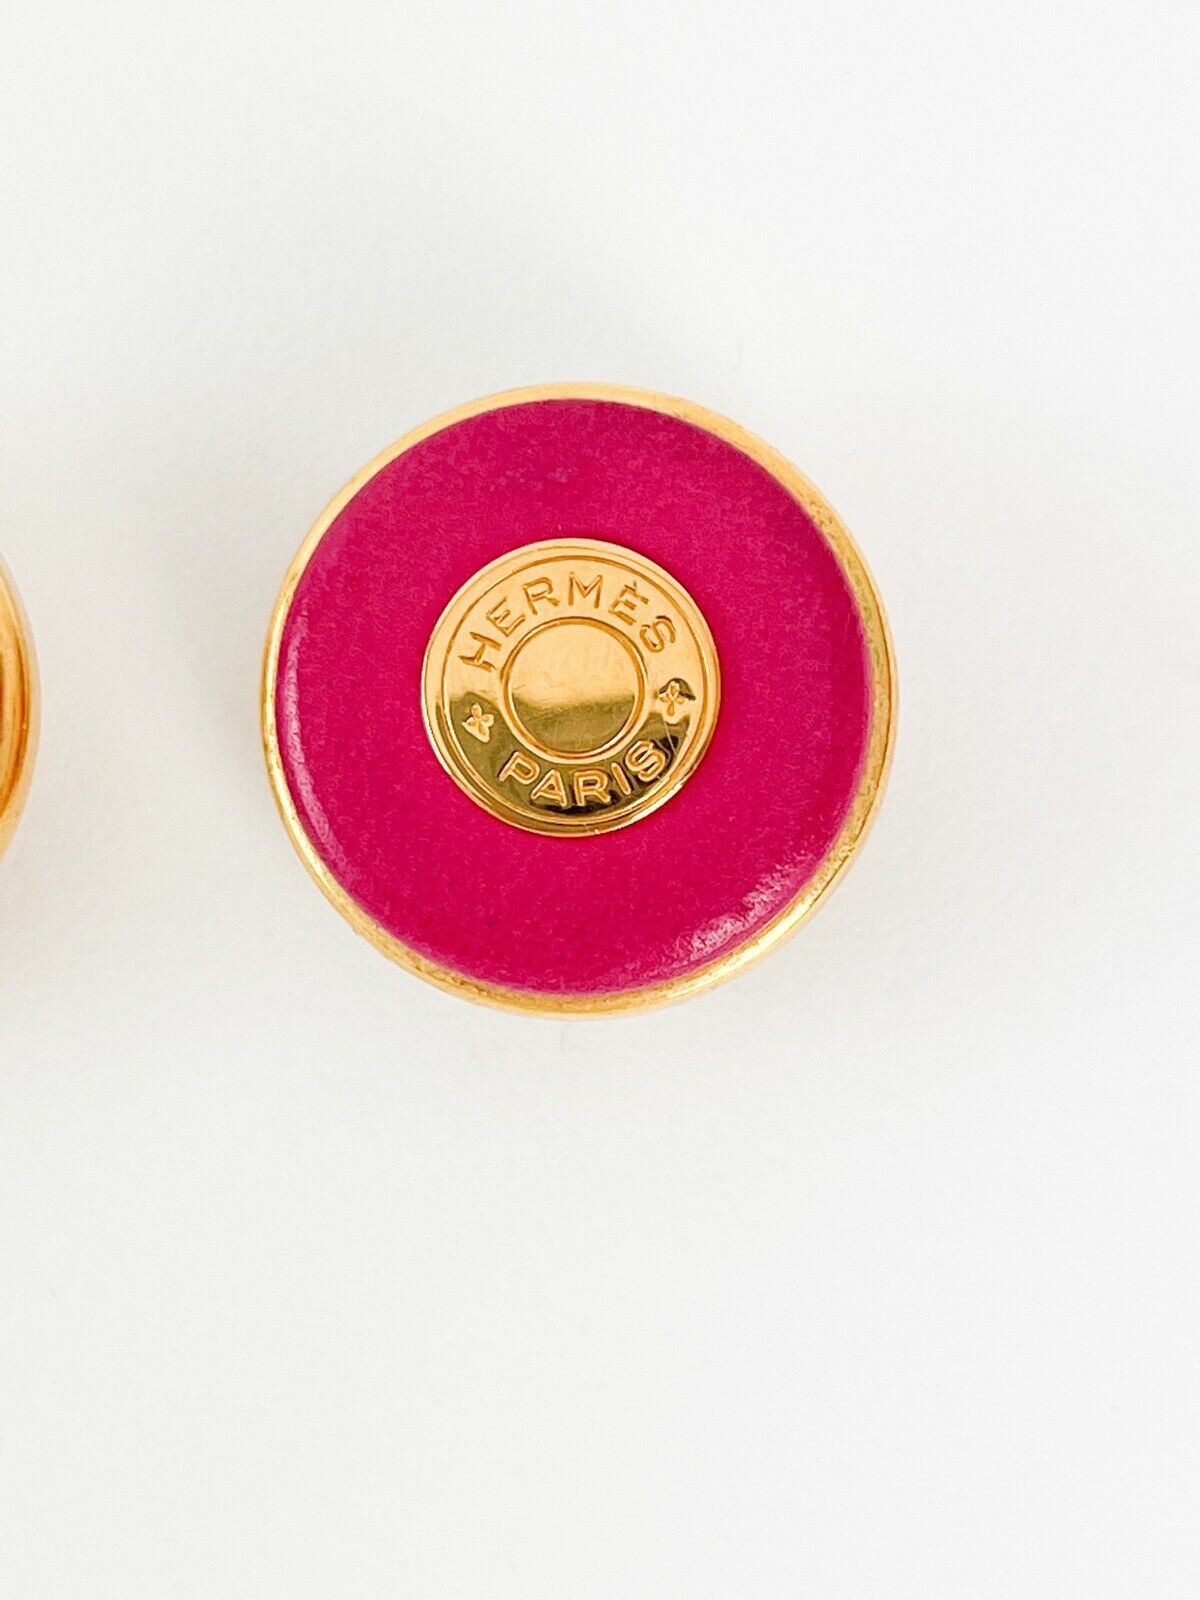 Hermes Paris Vintage Clip-On Earrings Round Leather Pink Gold Tone